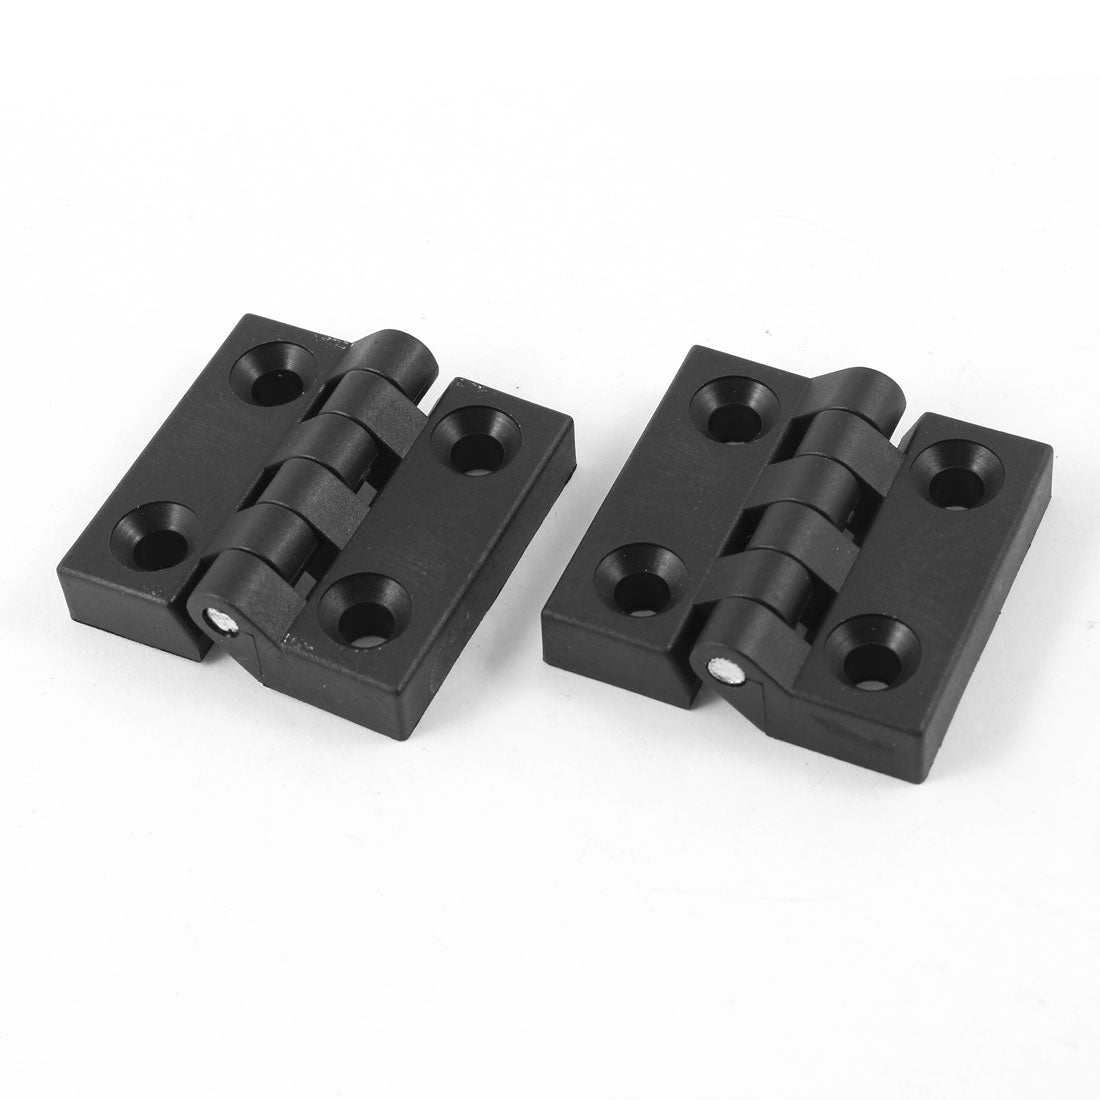 uxcell Uxcell 2 PCS 50mm x 50mm Countersunk Hole Cabinet Ball Bearing Plastic Hinge